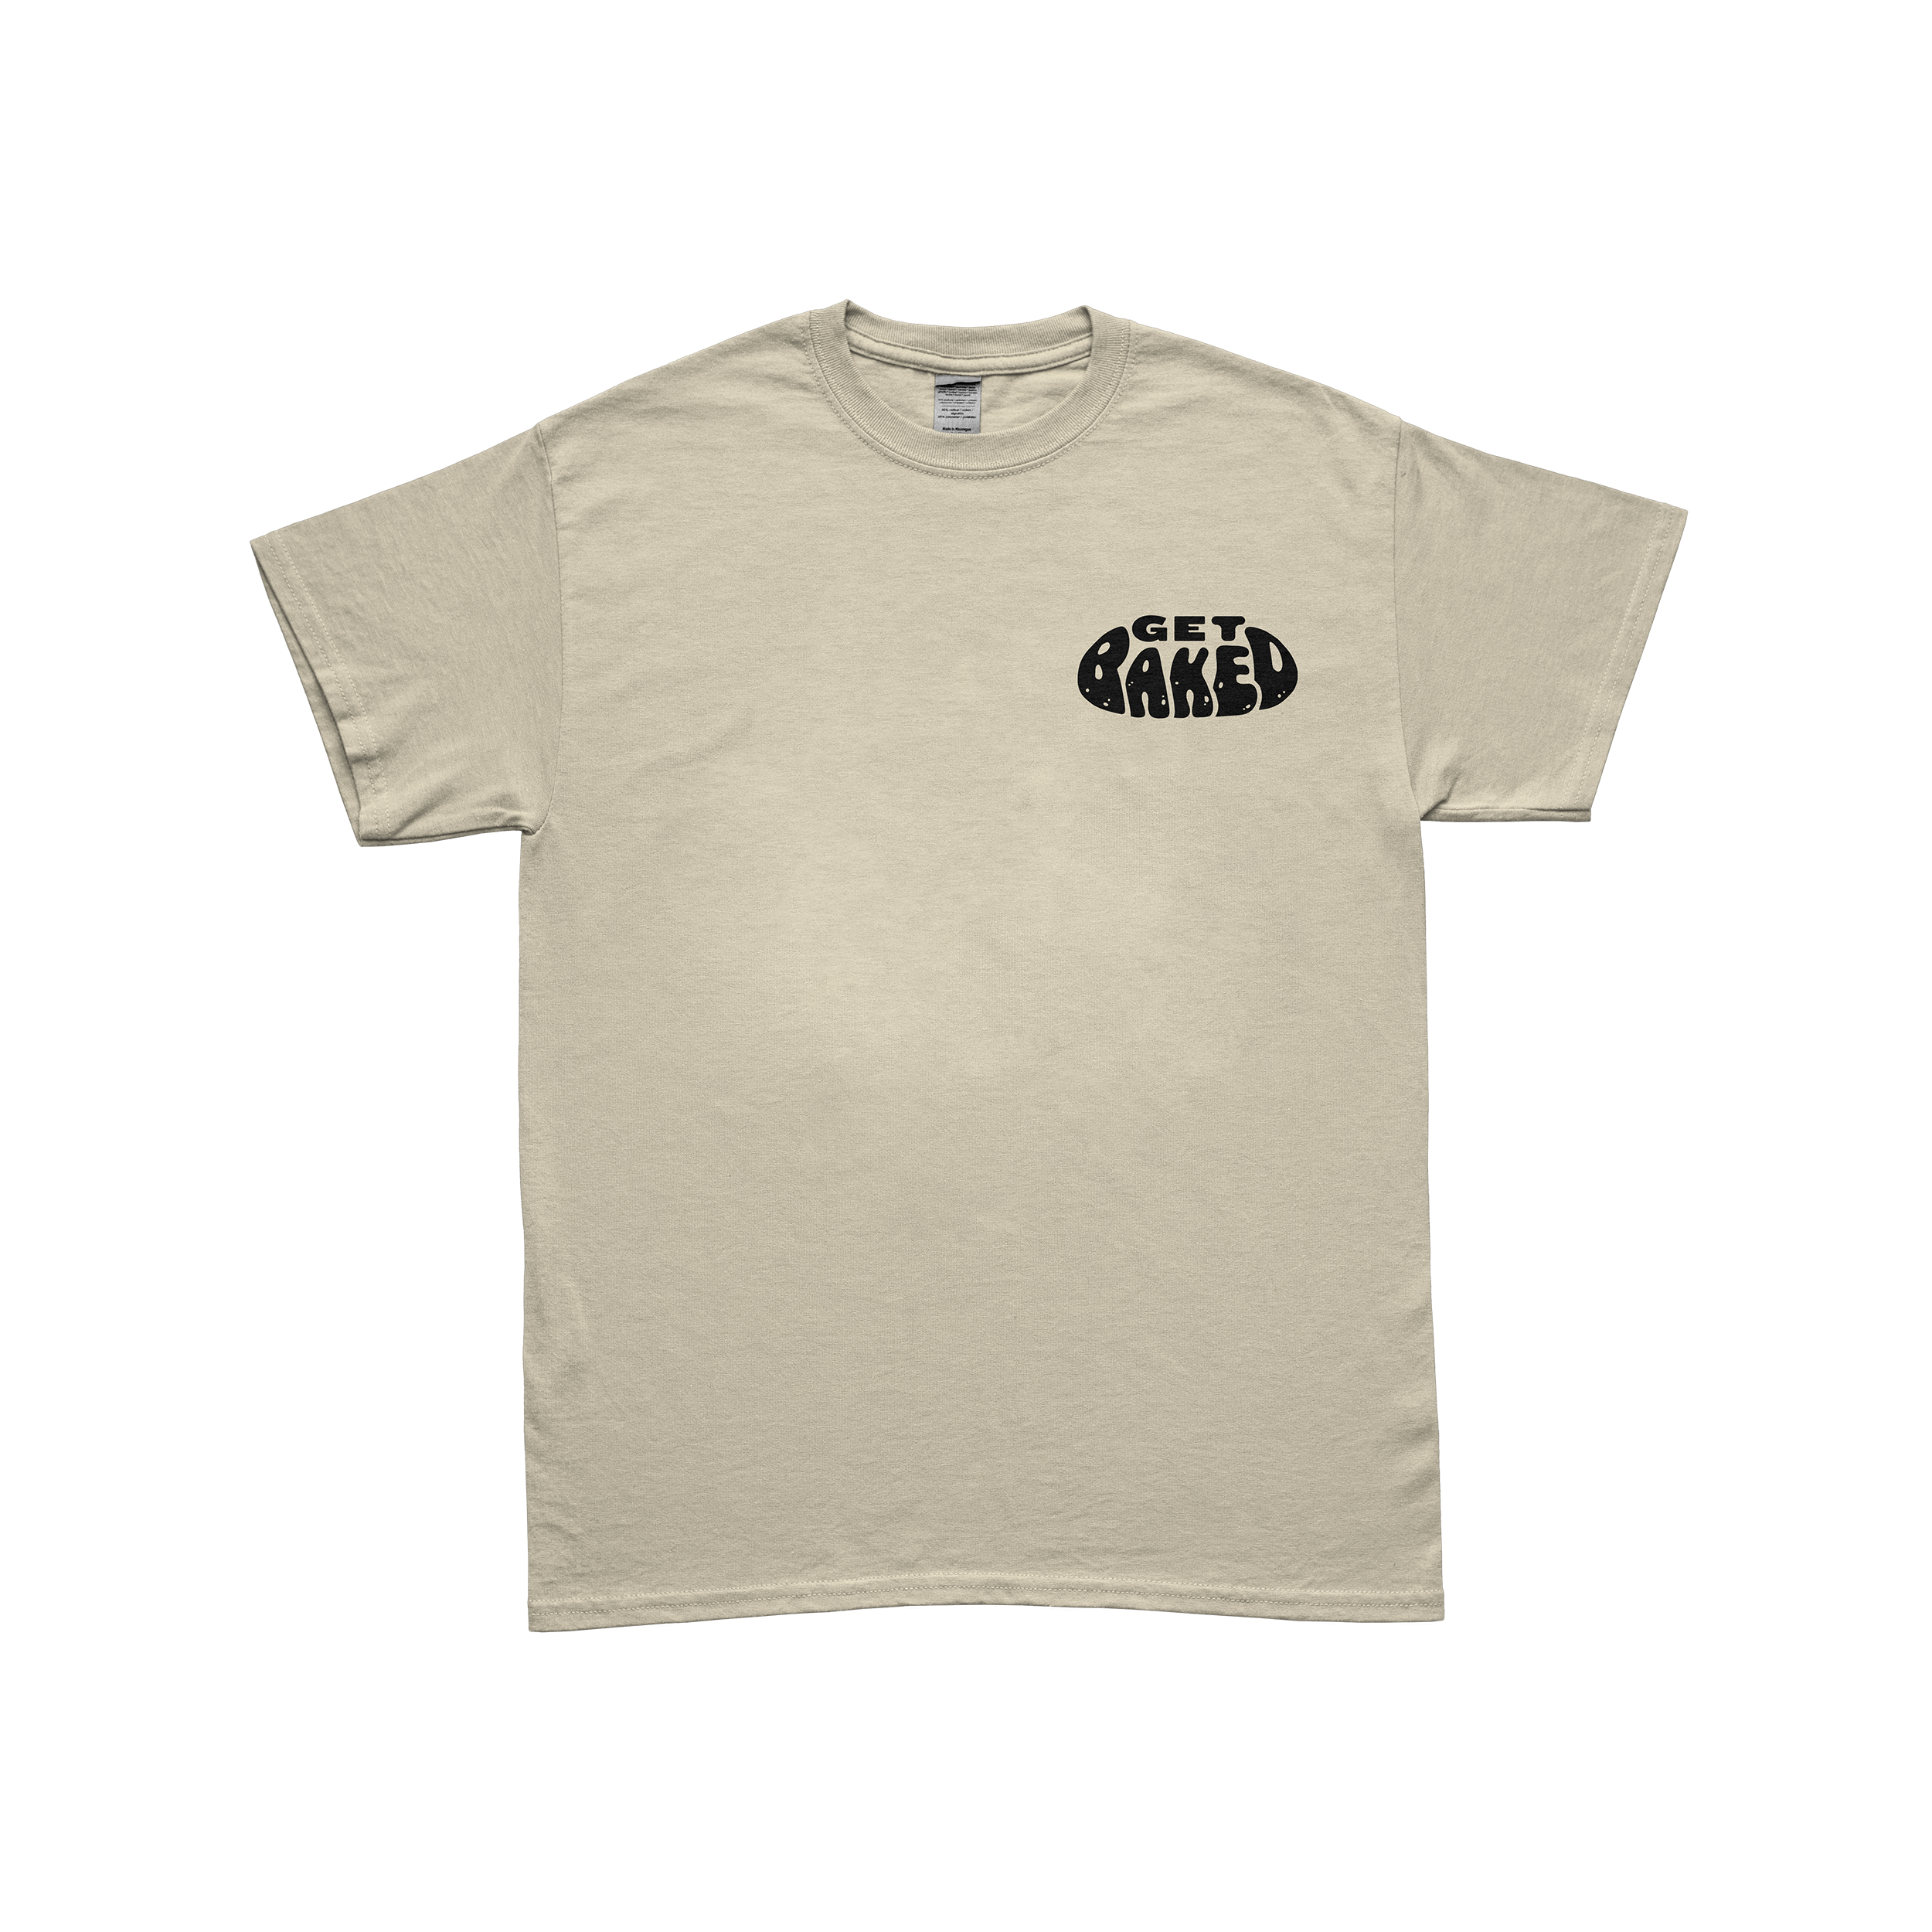 GBKD-Tee-2-FRONT.png